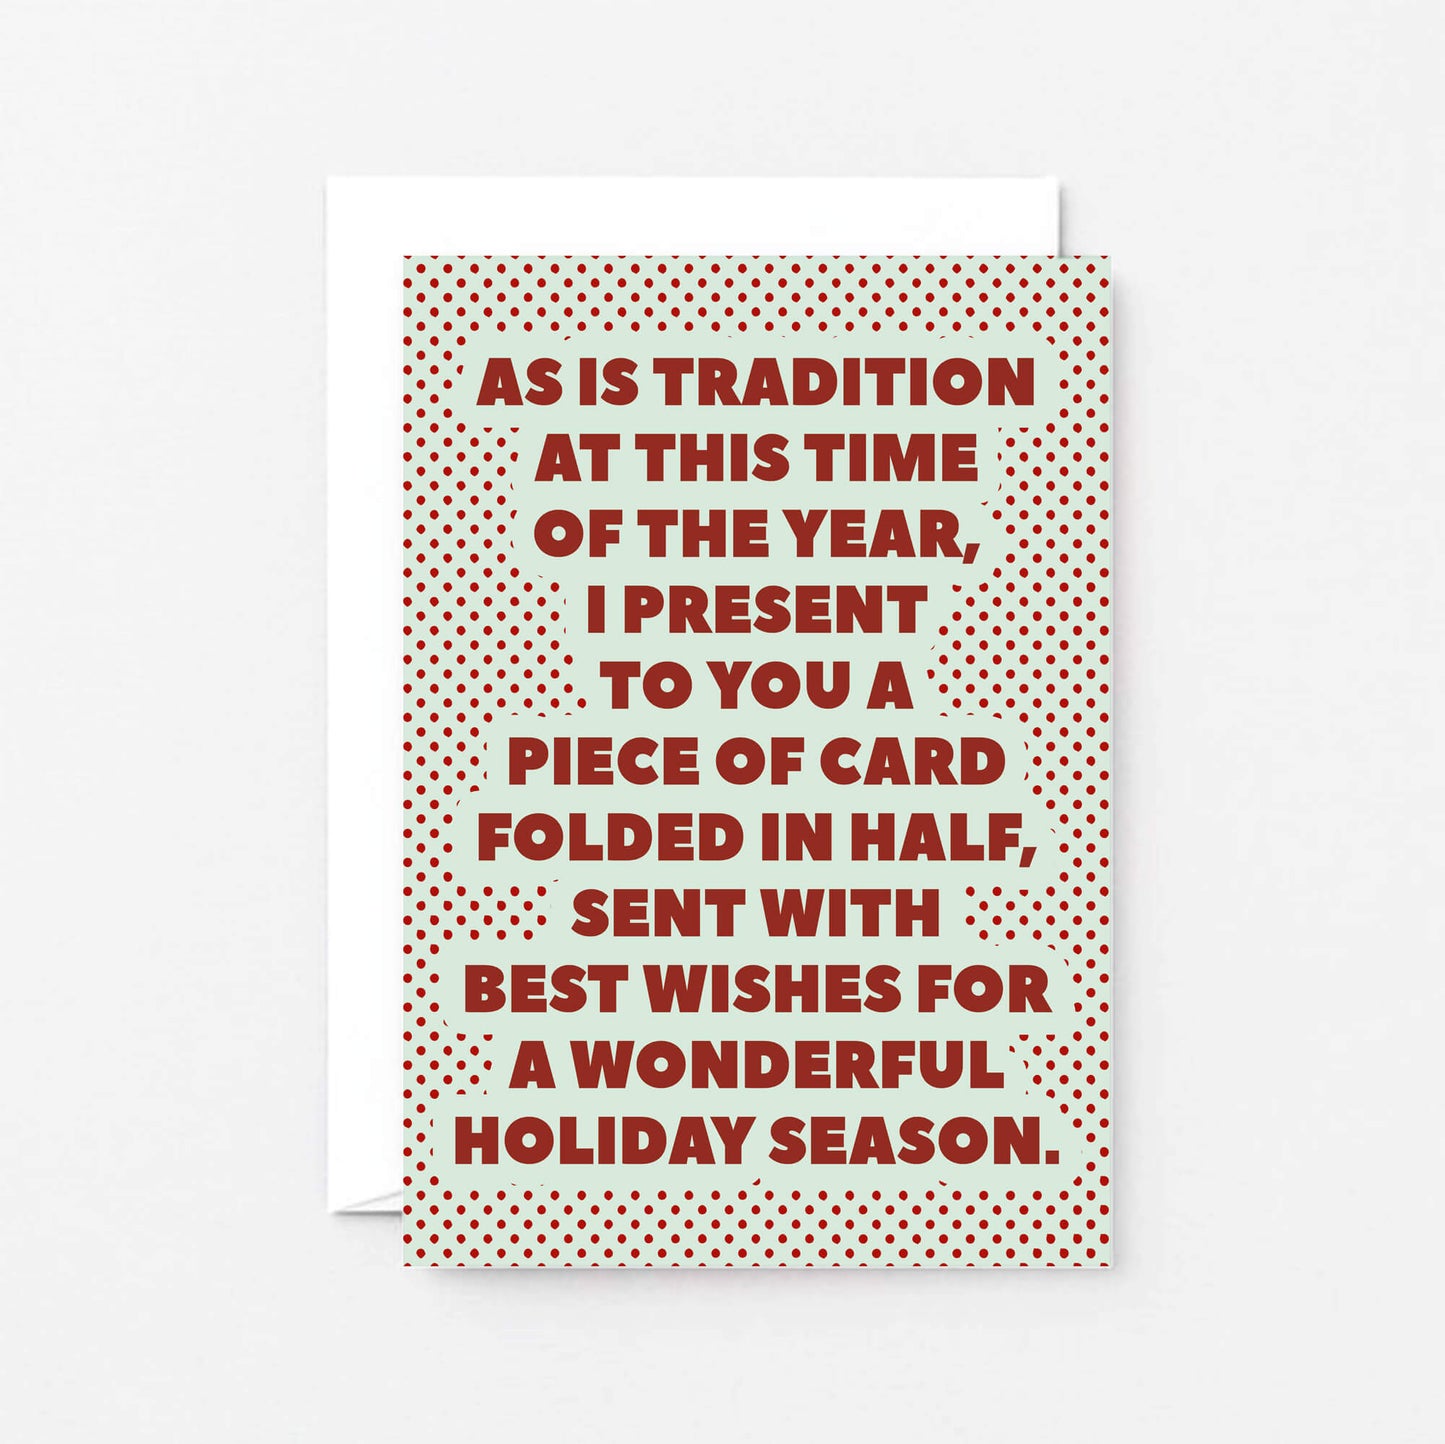 Christmas Card by SixElevenCreations. Reads As is tradition at this time of the year, I present to you a piece of card folded in half, sent with best wishes for a wonderful holiday season. Product Code SEC0074A6